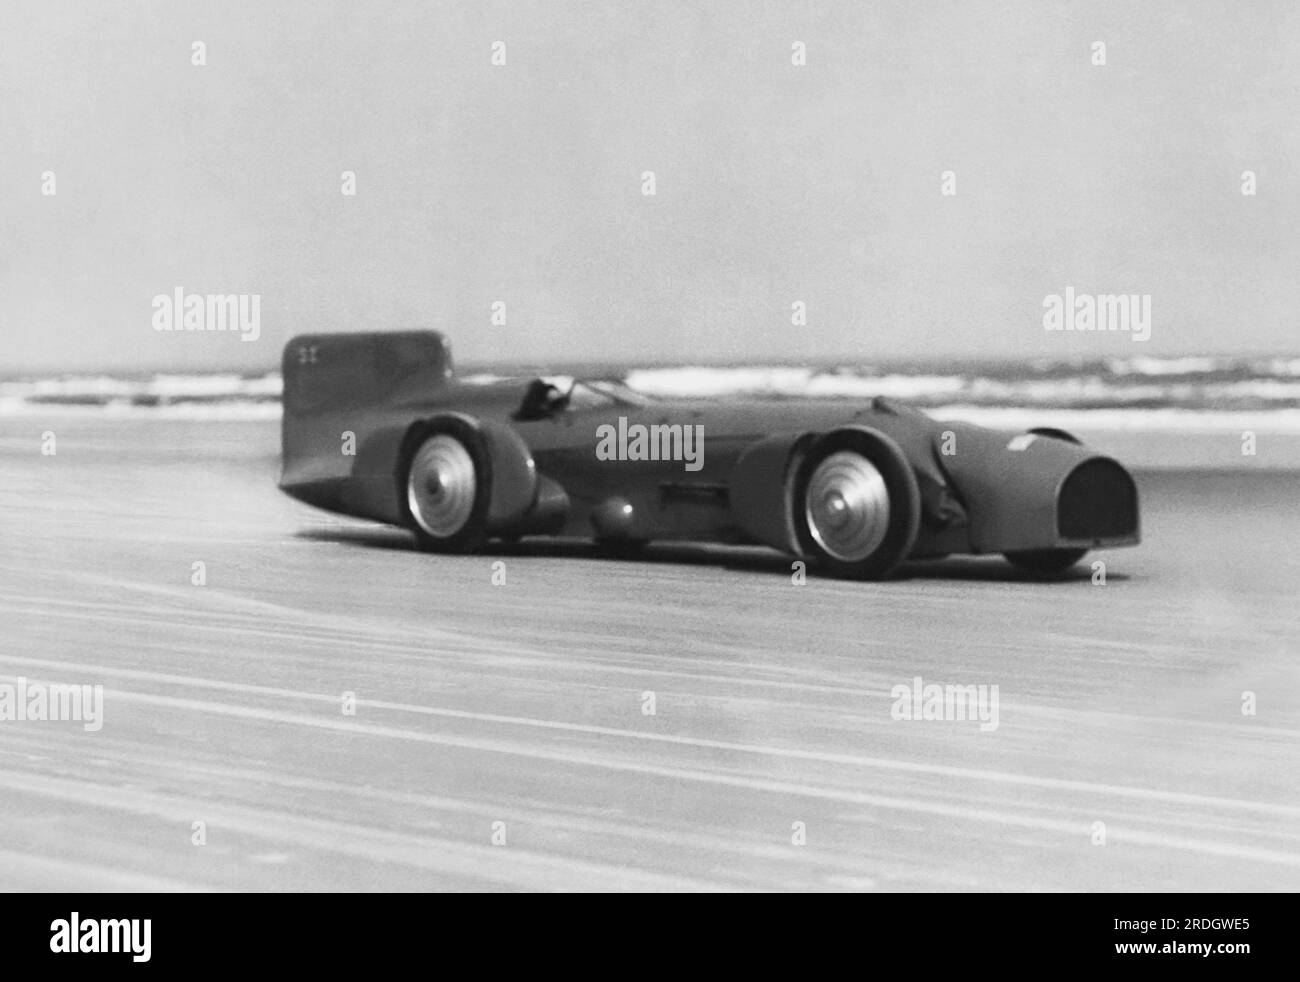 Daytona Beach, Florida:  February, 1931 British racer Captain Malcolm Campbell in his Bluebird race car setting a new auto speed record of 245 mph to shatter the old one of 231 mph by Major Seagrave. Stock Photo